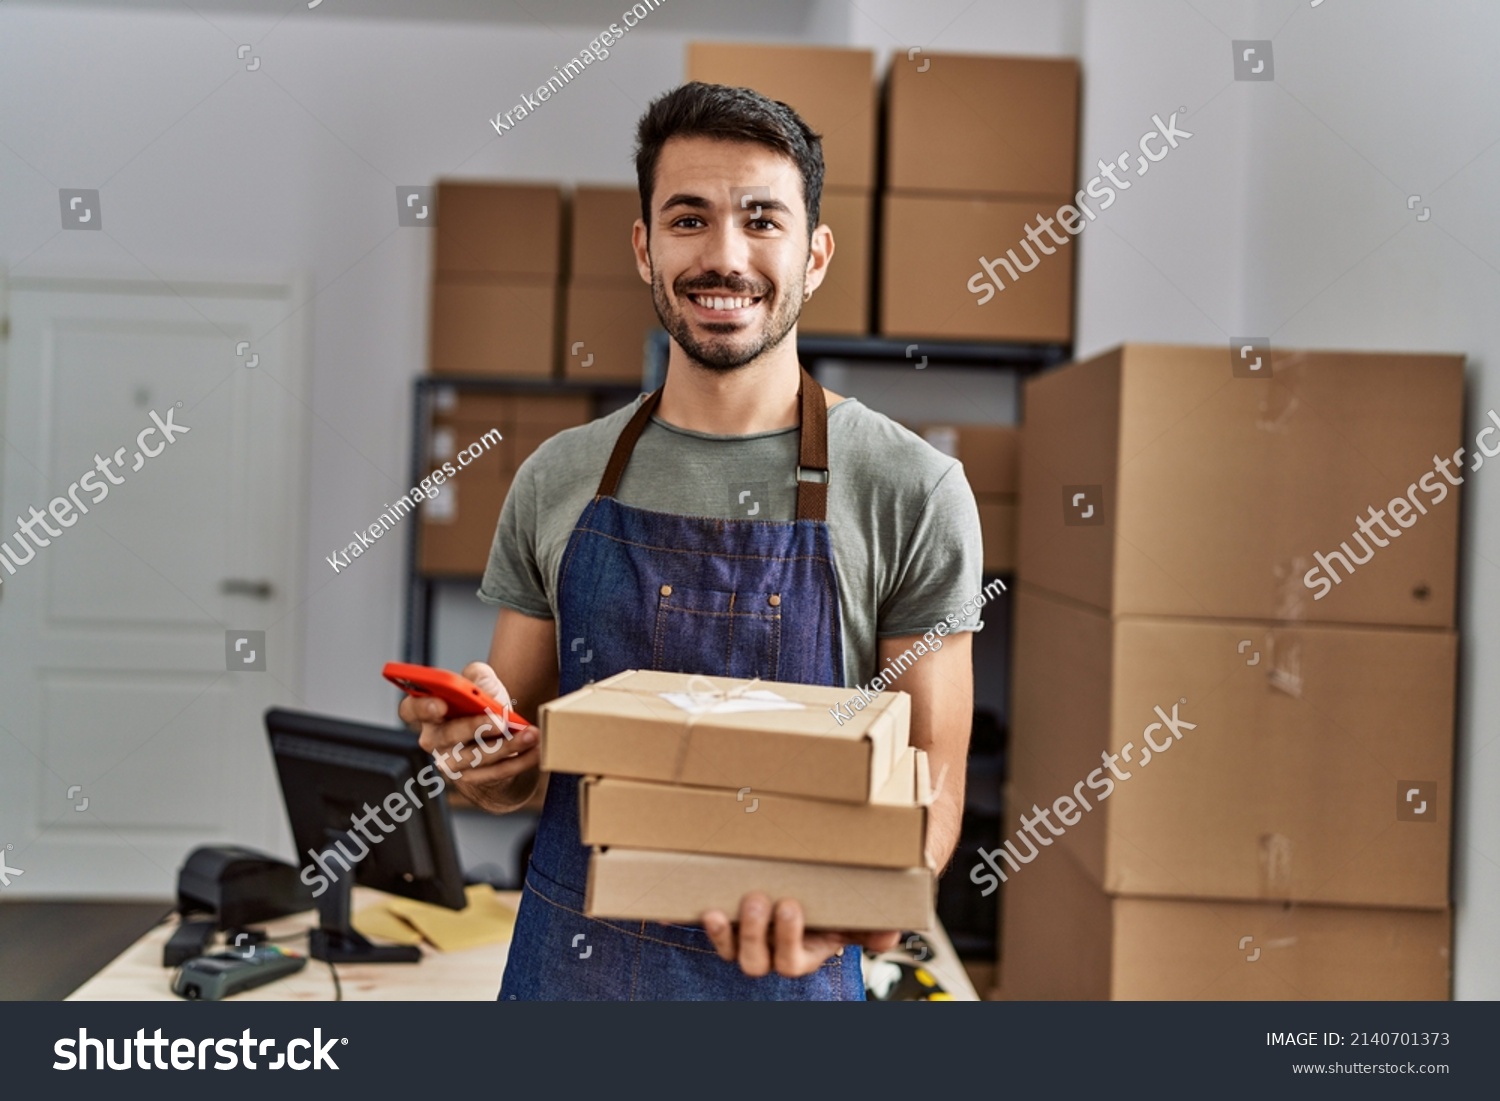 Young hispanic man business worker using smartphone holding packages at storehouse #2140701373